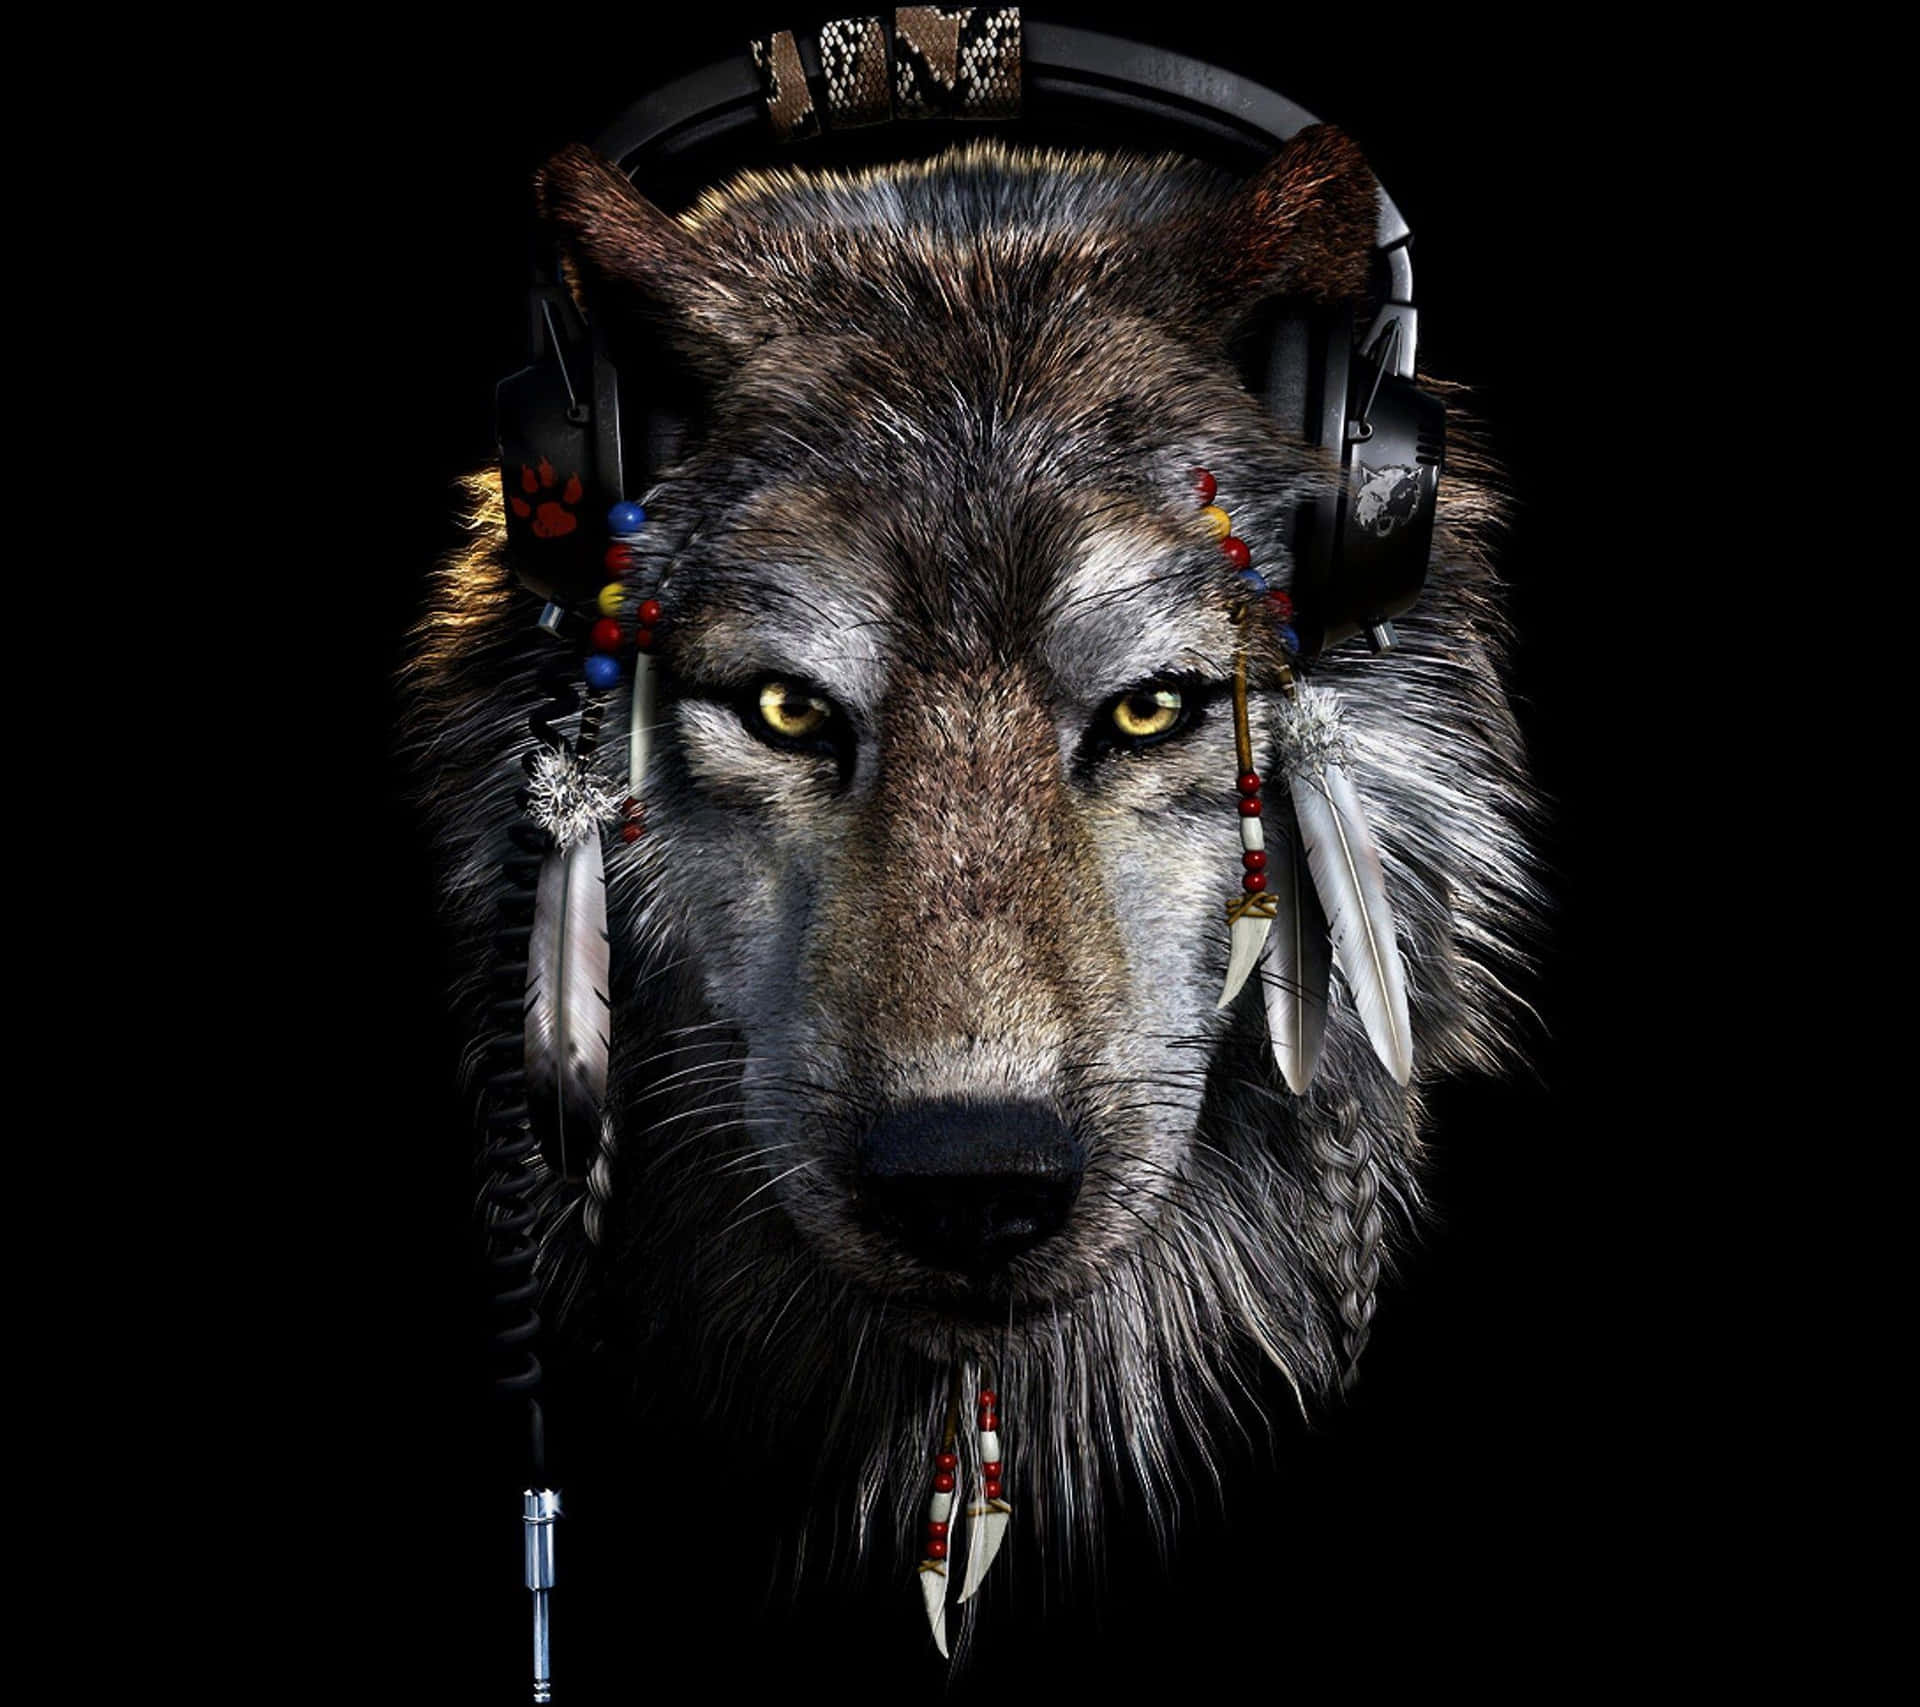 Alpha Wolf - The Leader of the Pack Wallpaper